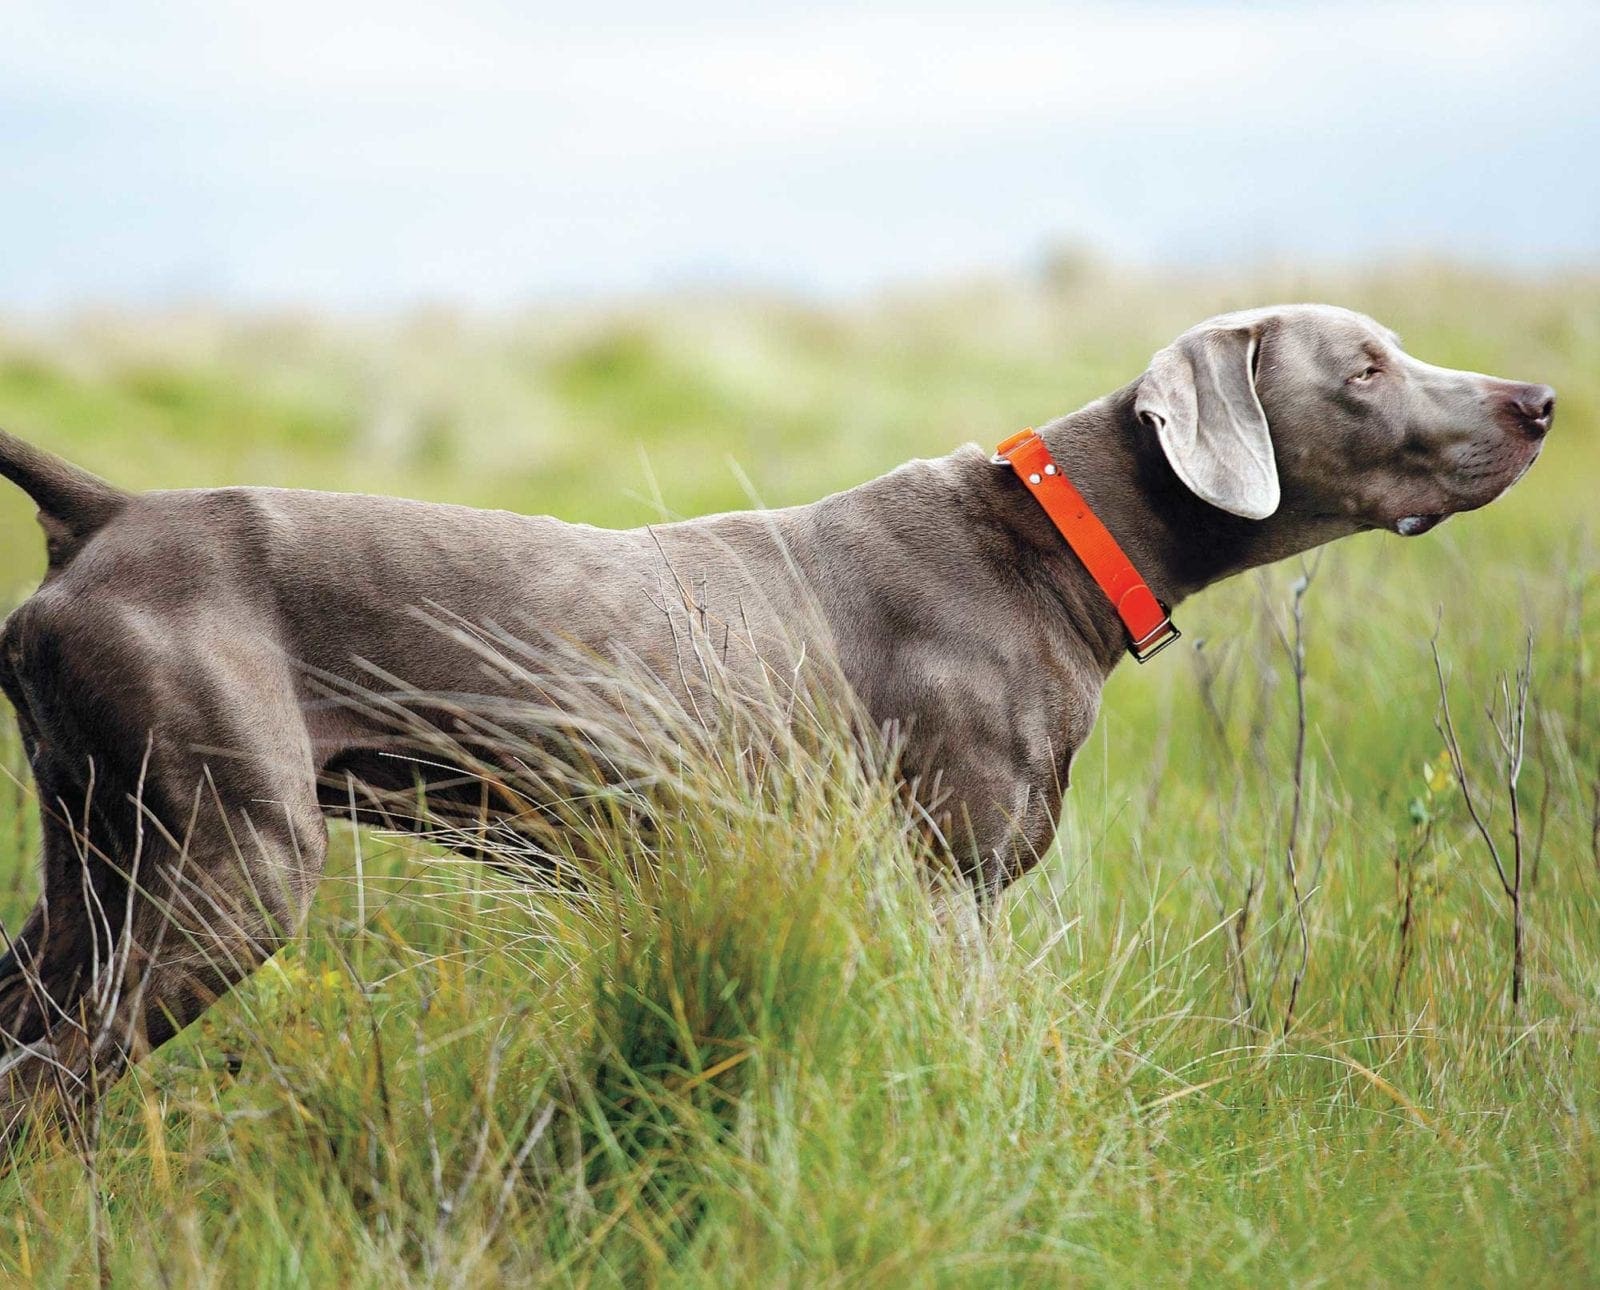 A Weimaraner on point during training.